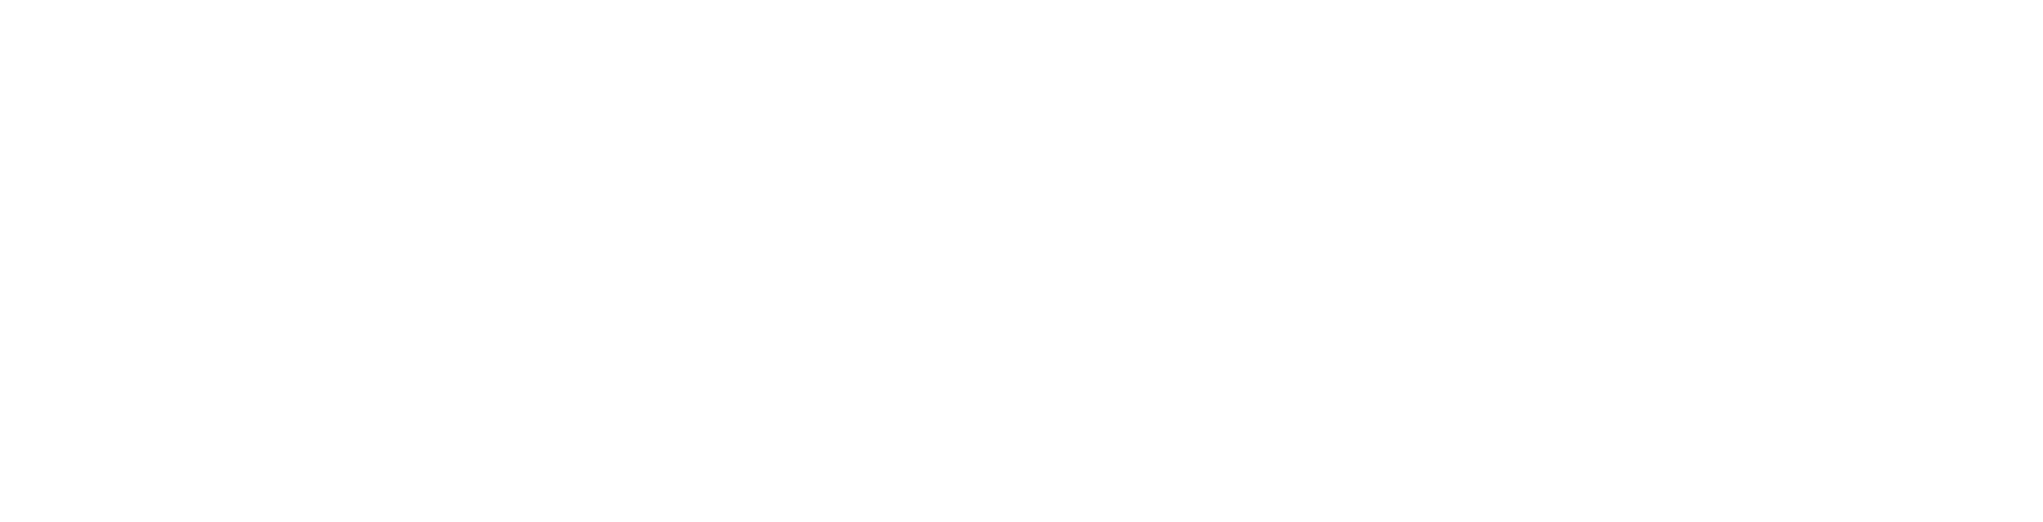 //proprius.com/wp-content/uploads/2020/01/Proprius-Logo-with-Tag-Line-White.png